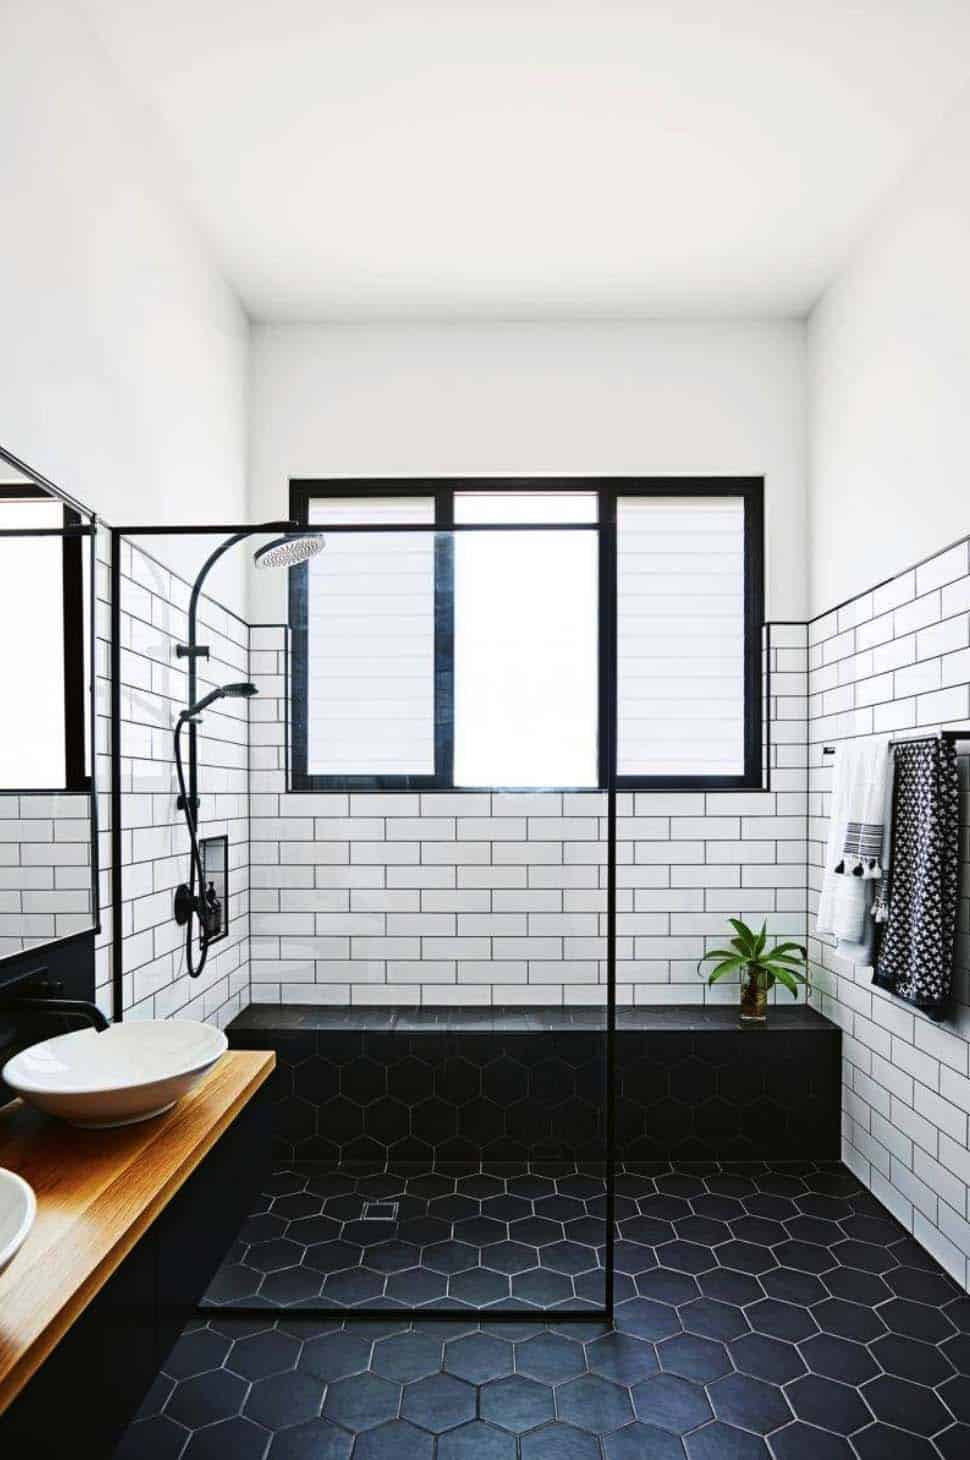 Black And White Tile Bathroom
 25 Incredibly stylish black and white bathroom ideas to